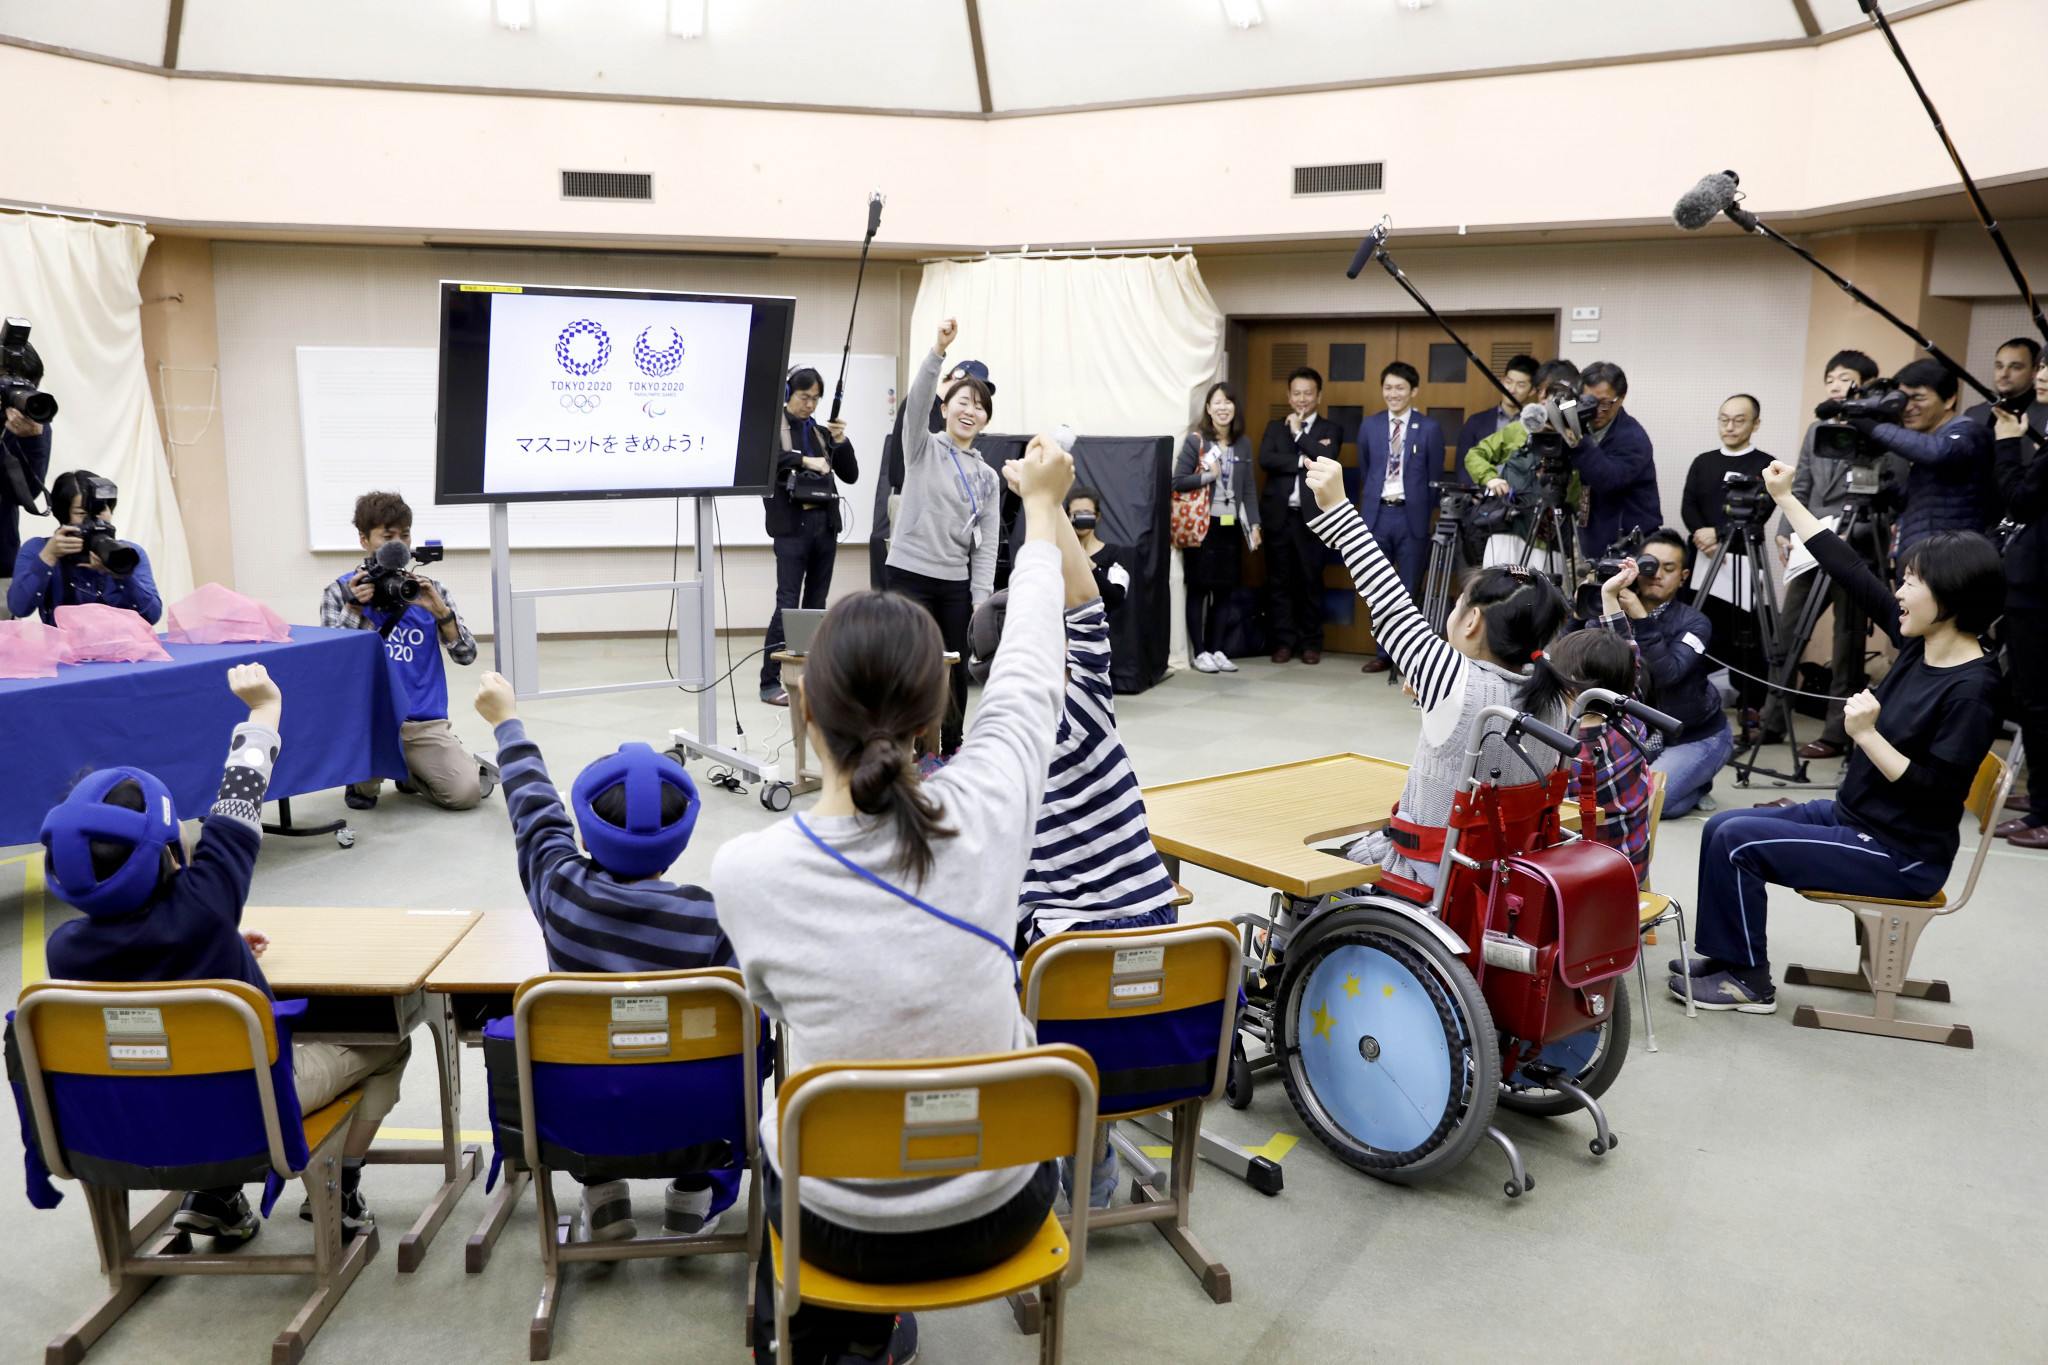 The winner of the school vote will be announced on February 28 ©Tokyo 2020